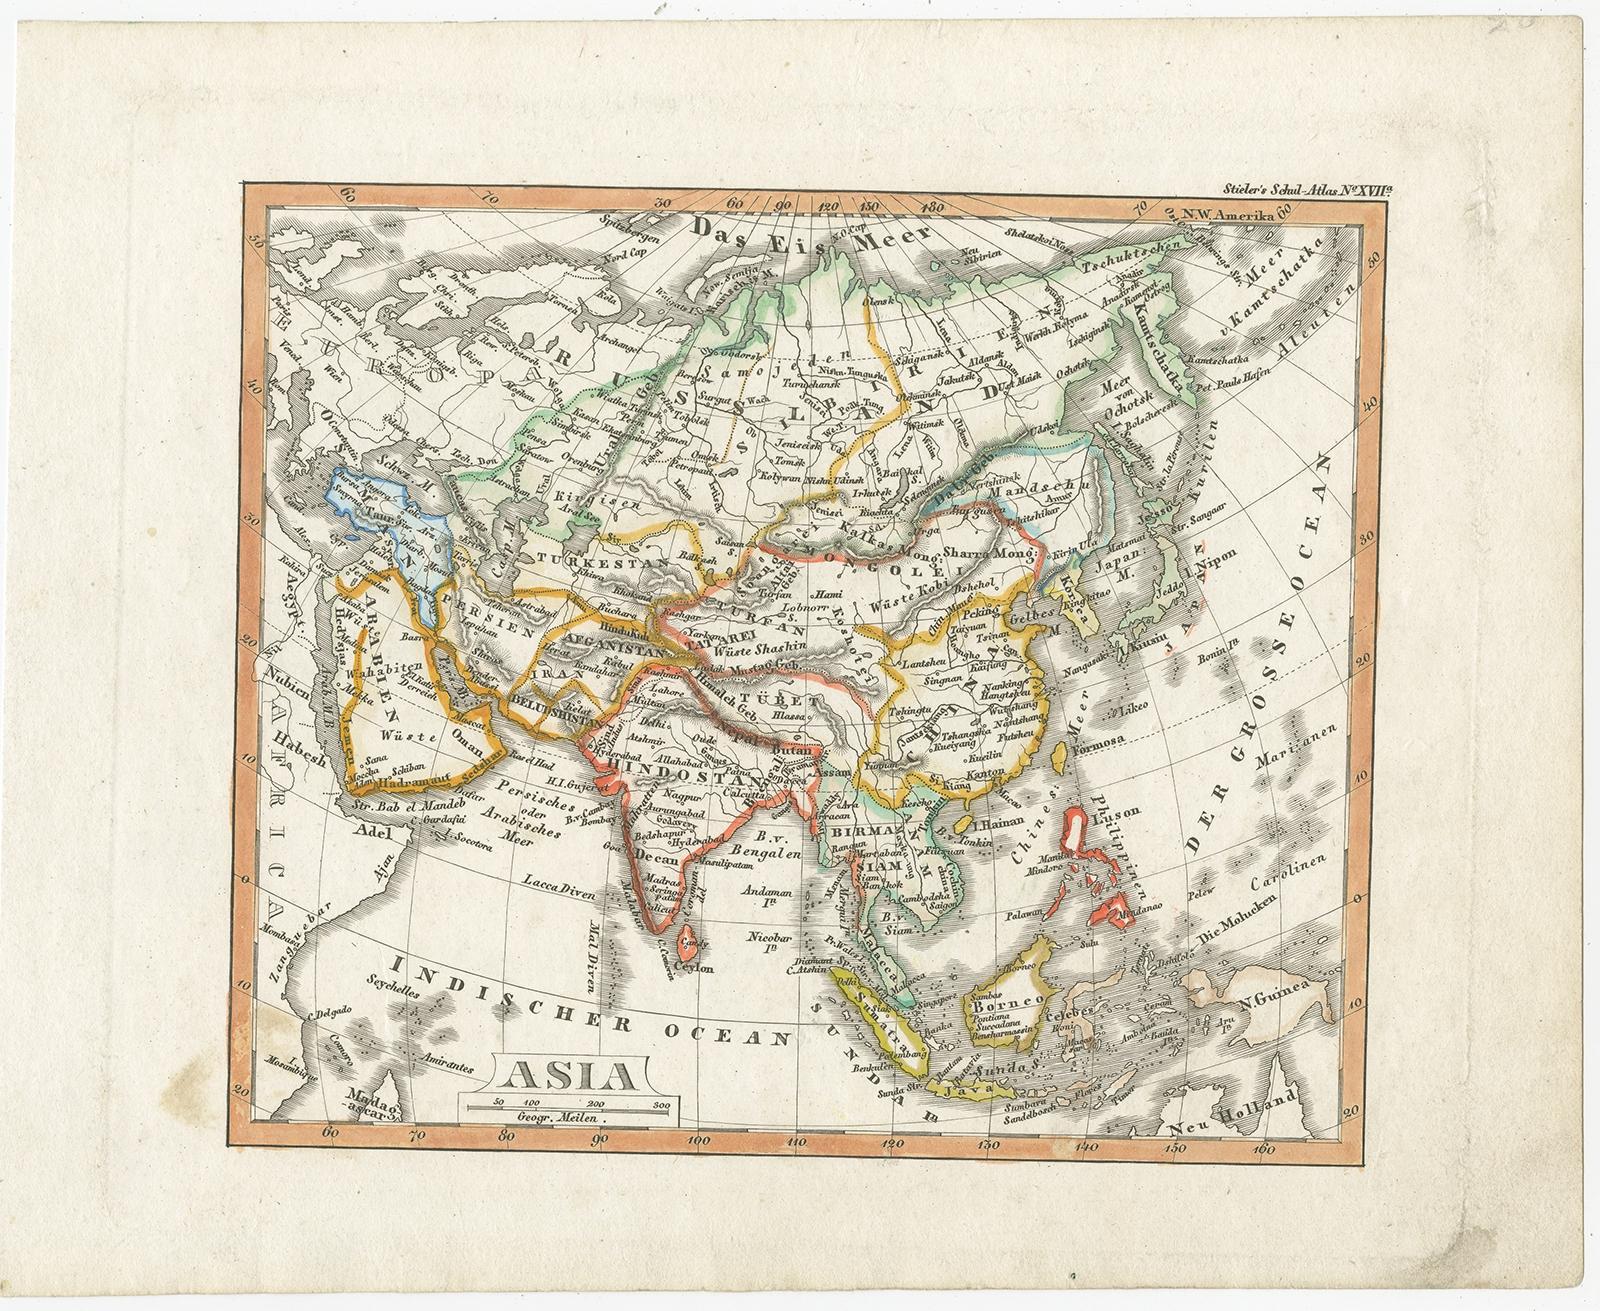 Paper Charming Scarce Small Antique Map of Asia, 1837 For Sale